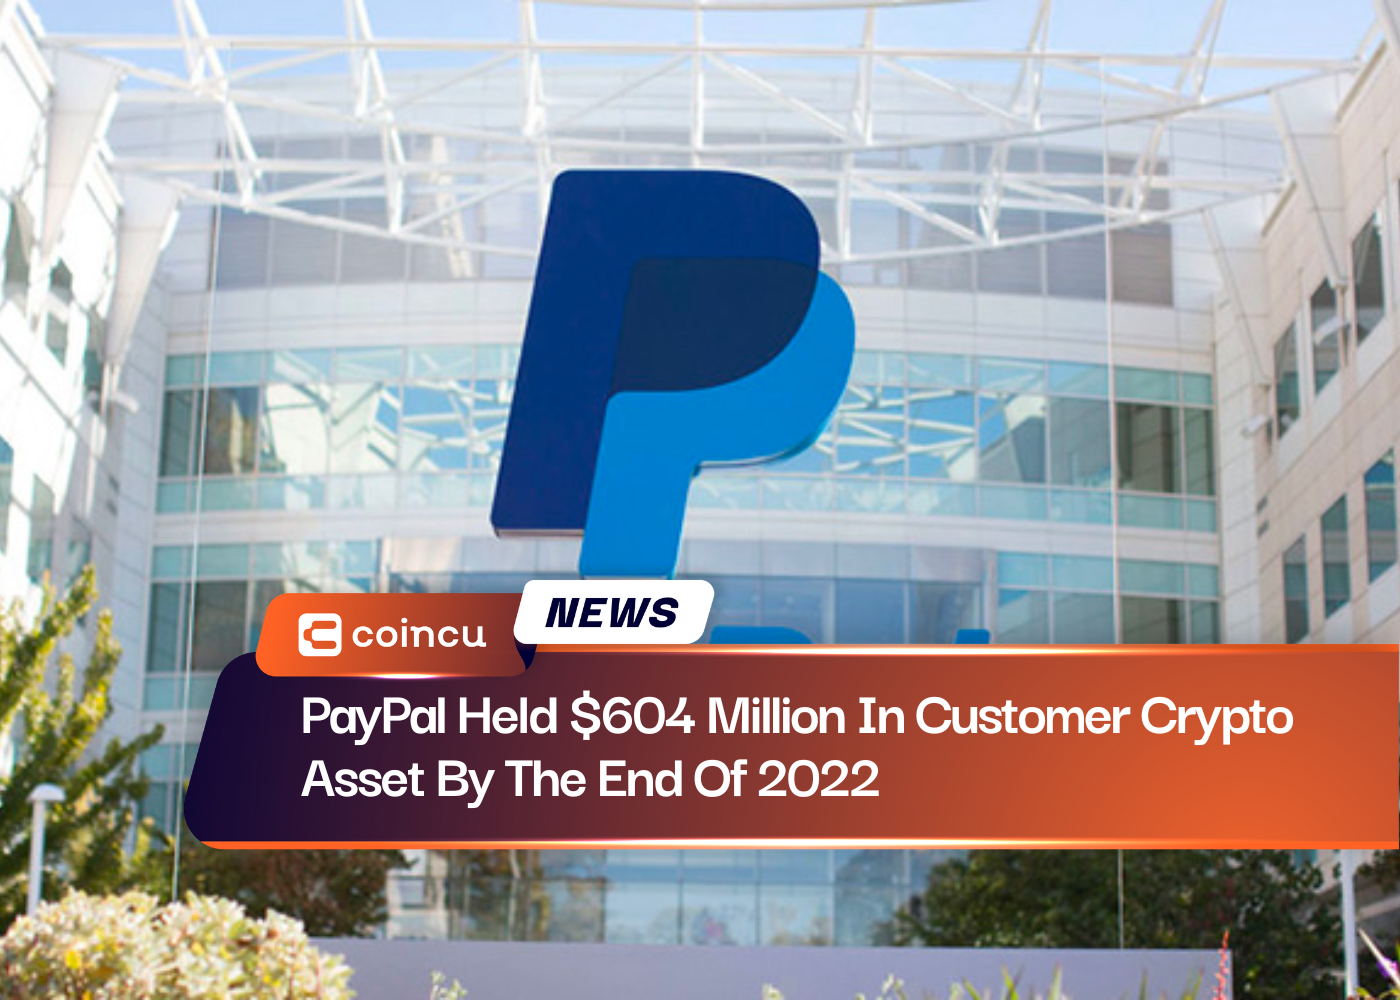 PayPal Held $604 Million In Customer Crypto Asset By The End Of 2022